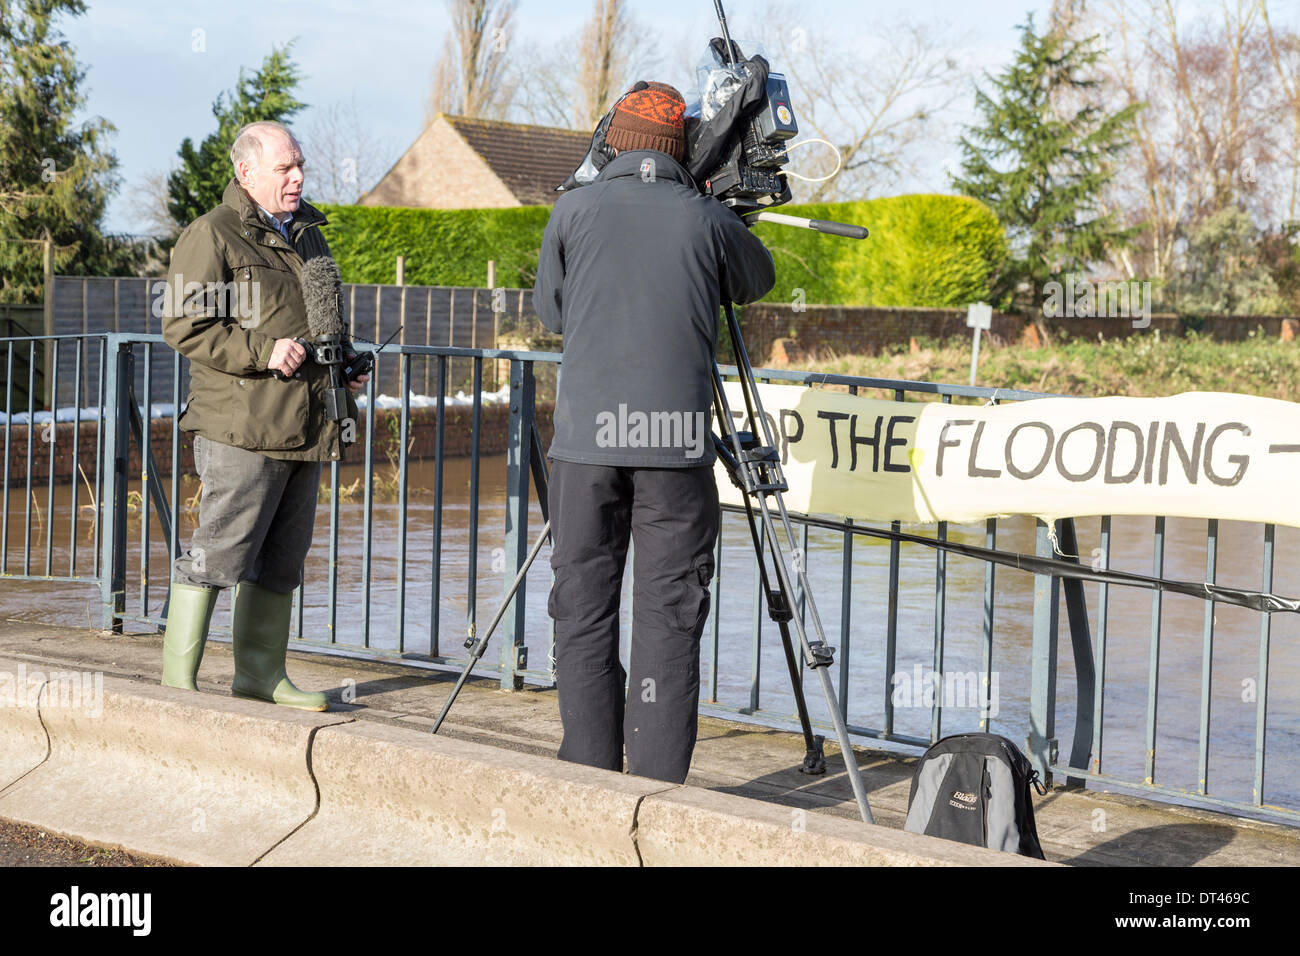 Burrowbridge, Somerset, UK. 8th February 2014. Conservative MP Mr Ian Liddell-Grainger being interviewed by BBC News on 8th February 2014 standing on the bridge over the River Parrett on the A361 at Burrowbridge, Somerset. Due to heavy rainfall, the rivers Parrett and Tone have burst their banks flooding nearby farmland and leaving houses underwater. Following visits by Lord Chris Smith and David Cameron yesterday, a severe flood alert remains and some occupants have been told to evacuate. The Somerset Levels have experienced the worst flooding in living history. Credit:  Nick Cable/Alamy Live Stock Photo